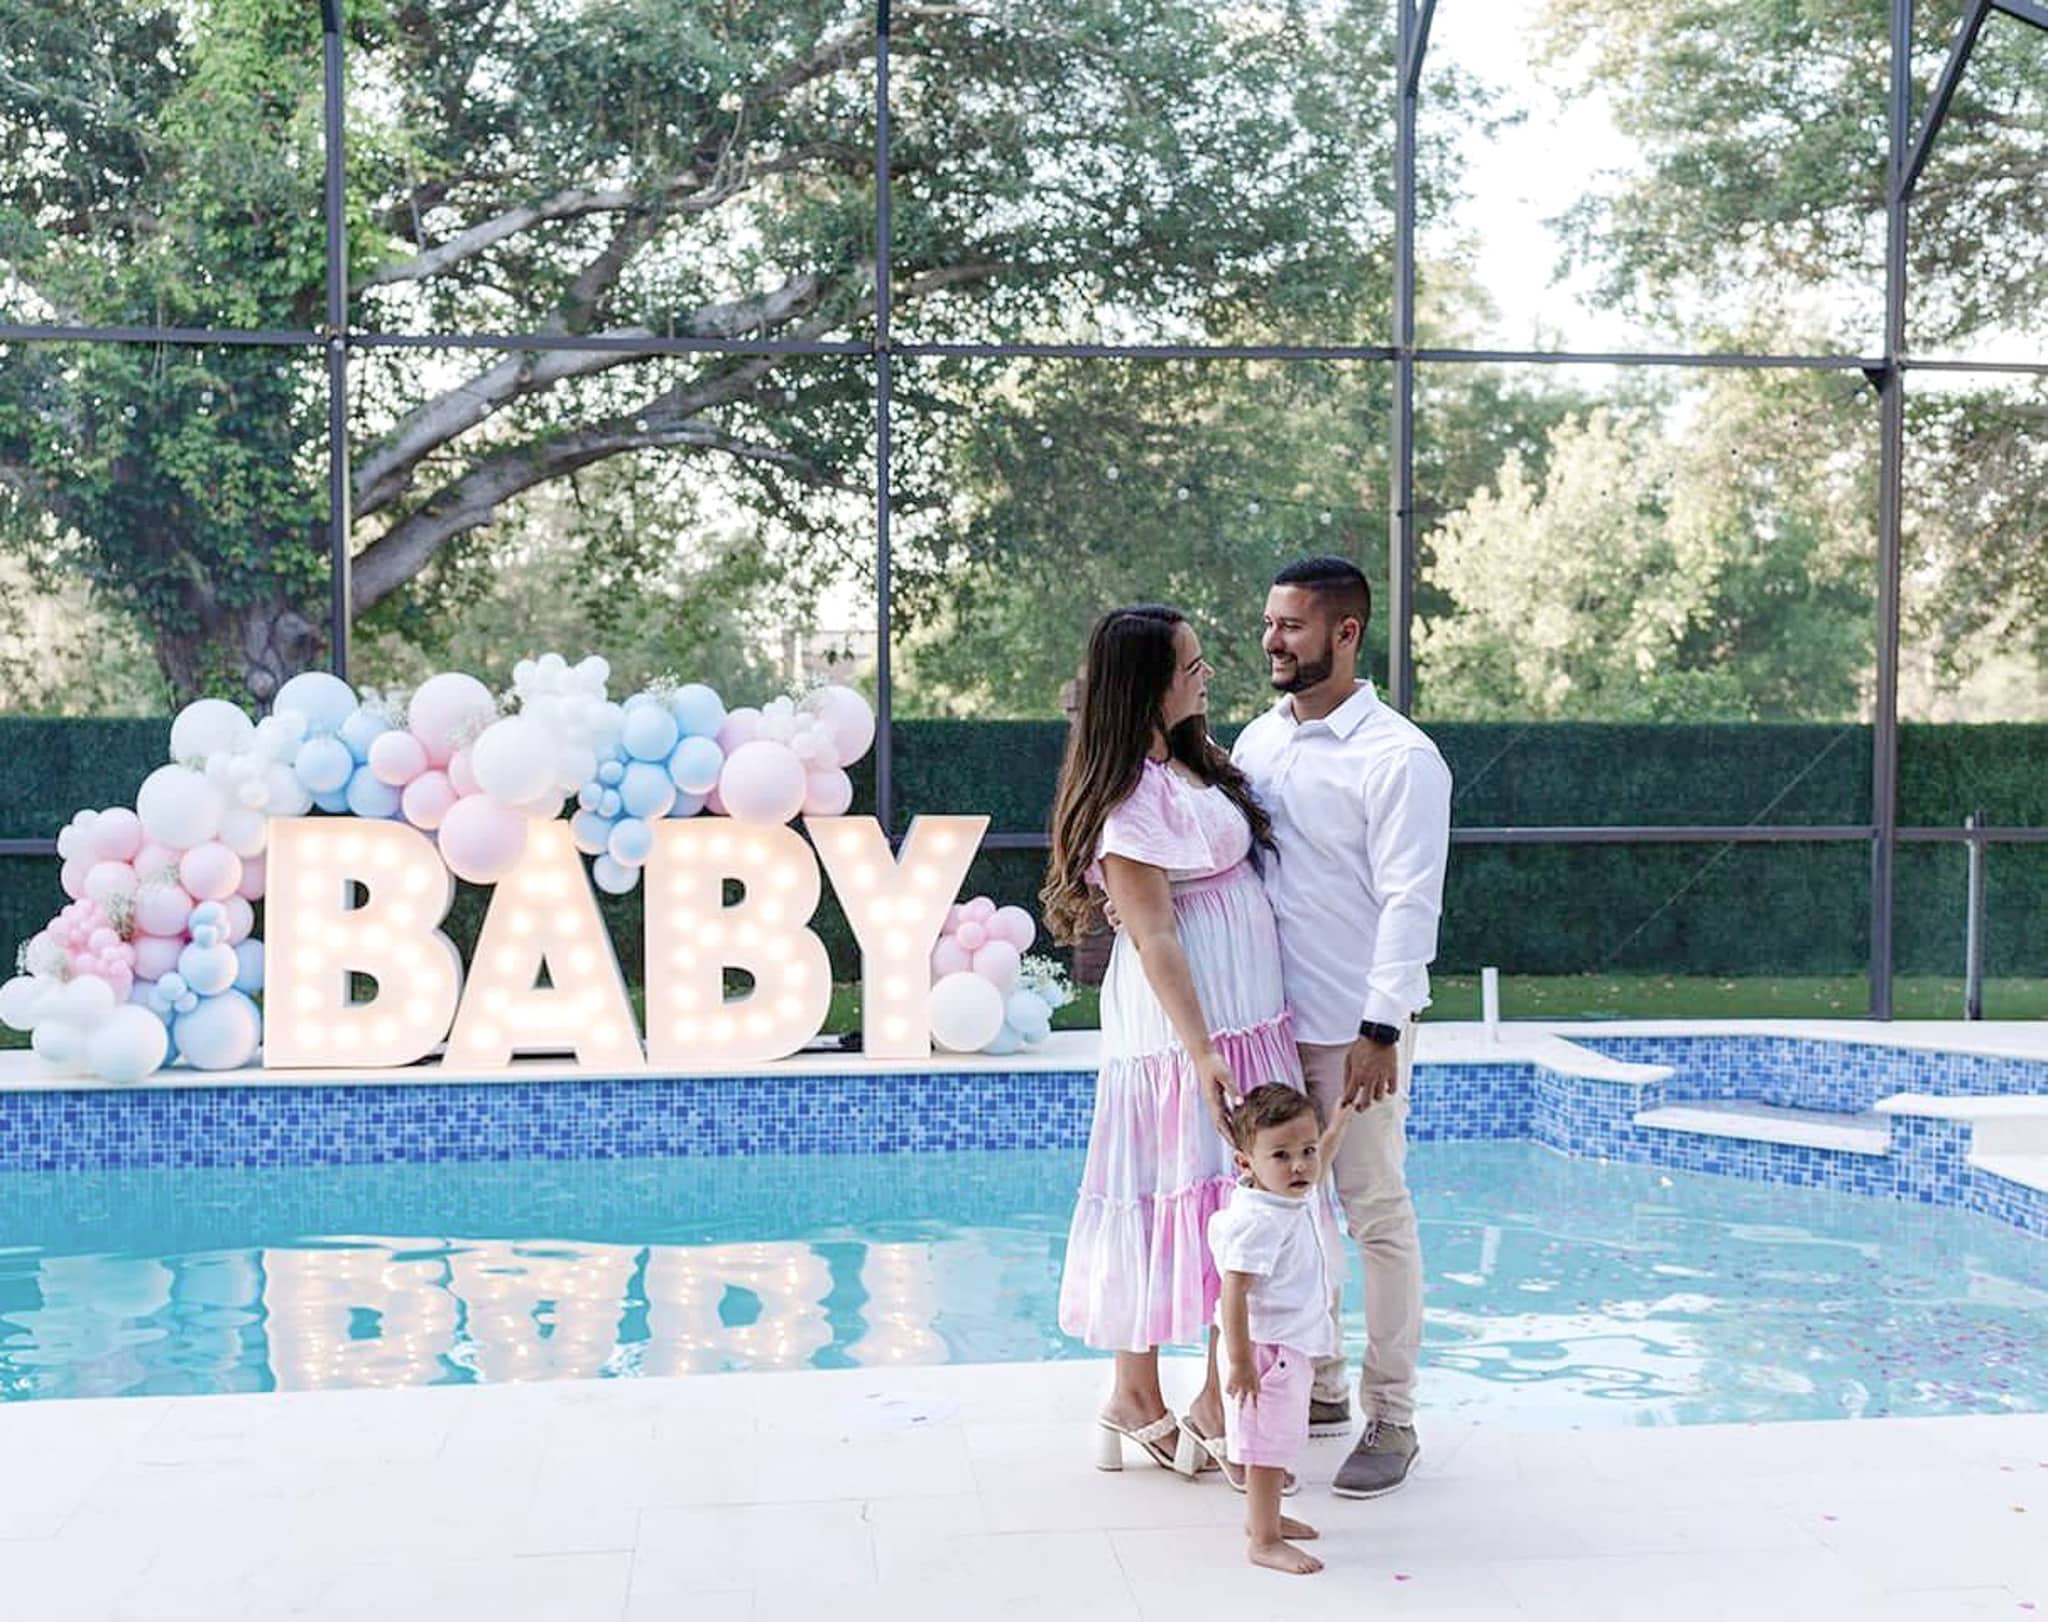 The word baby lit up in marquee letters near a pool. The word is surrounded by pink and blue balloons while the family stands in the front.